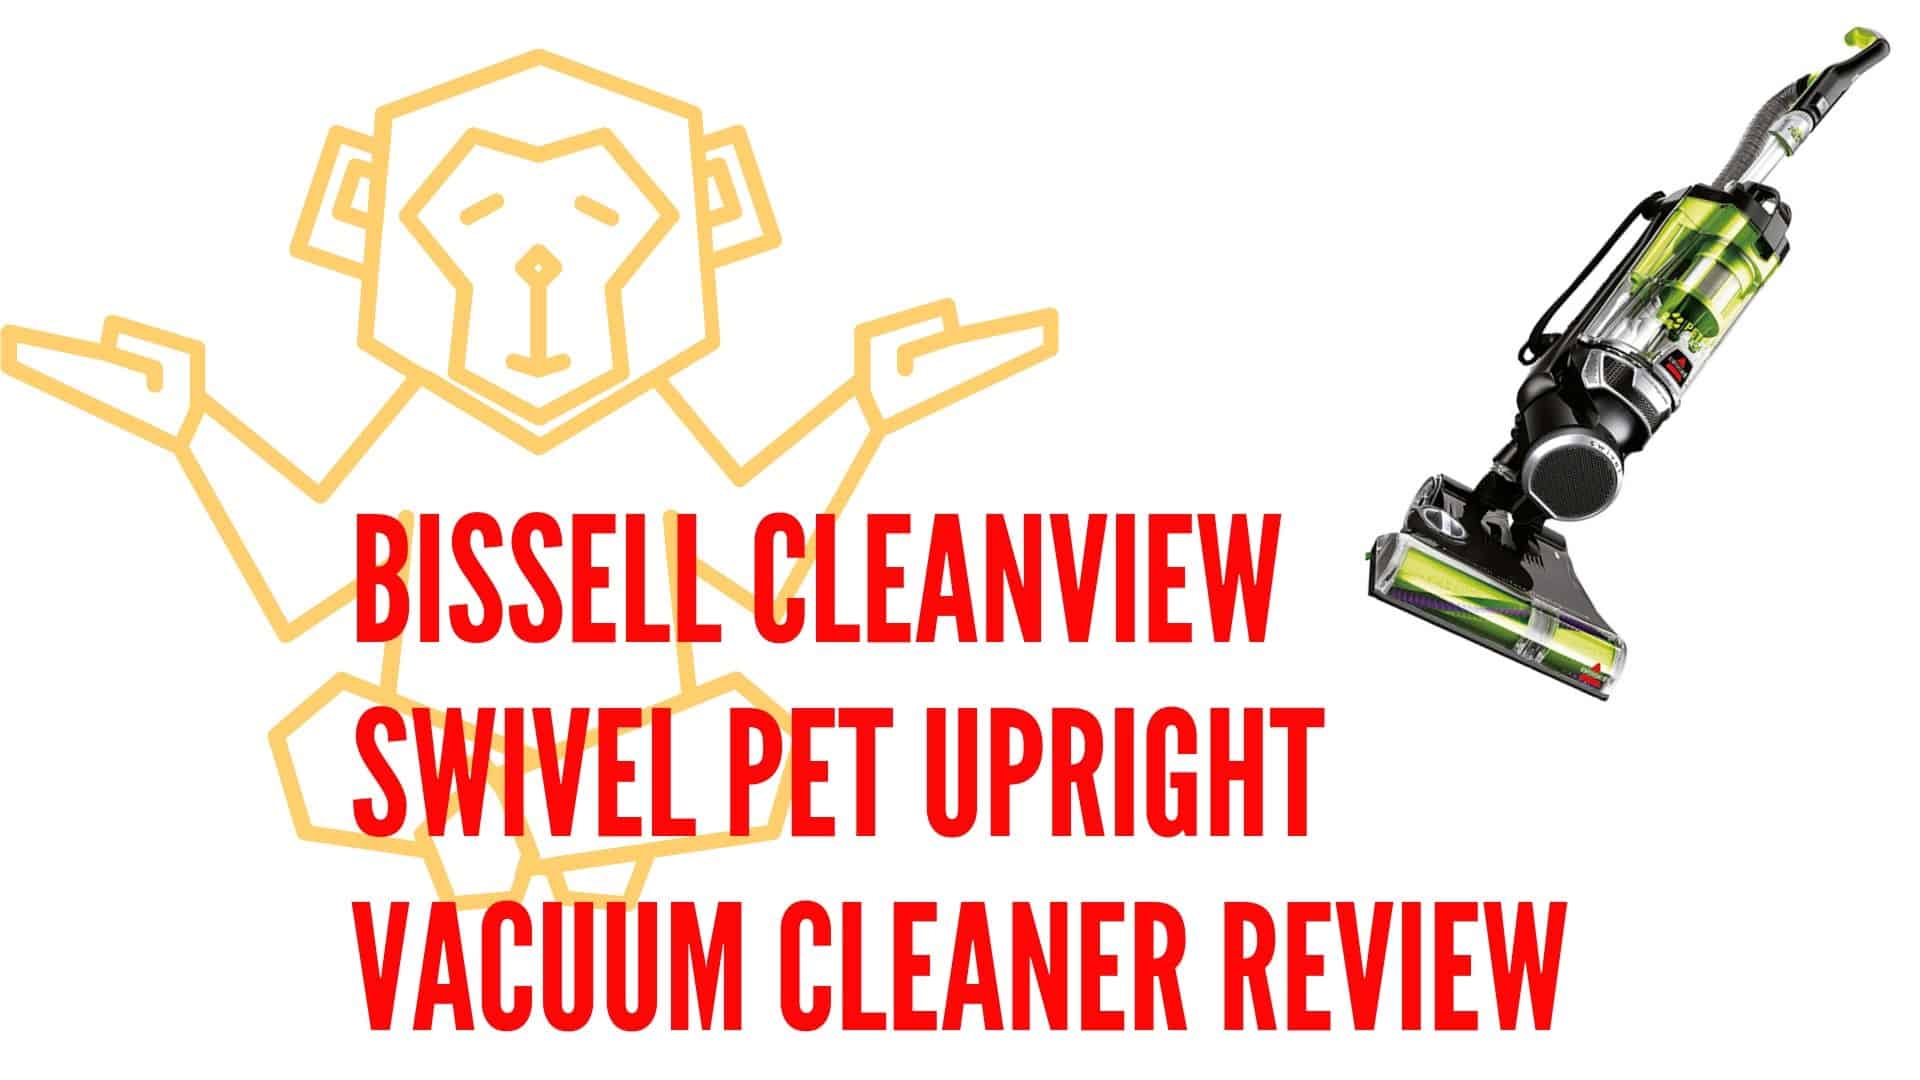 BISSELL Cleanview Swivel Pet Upright Vacuum Cleaner